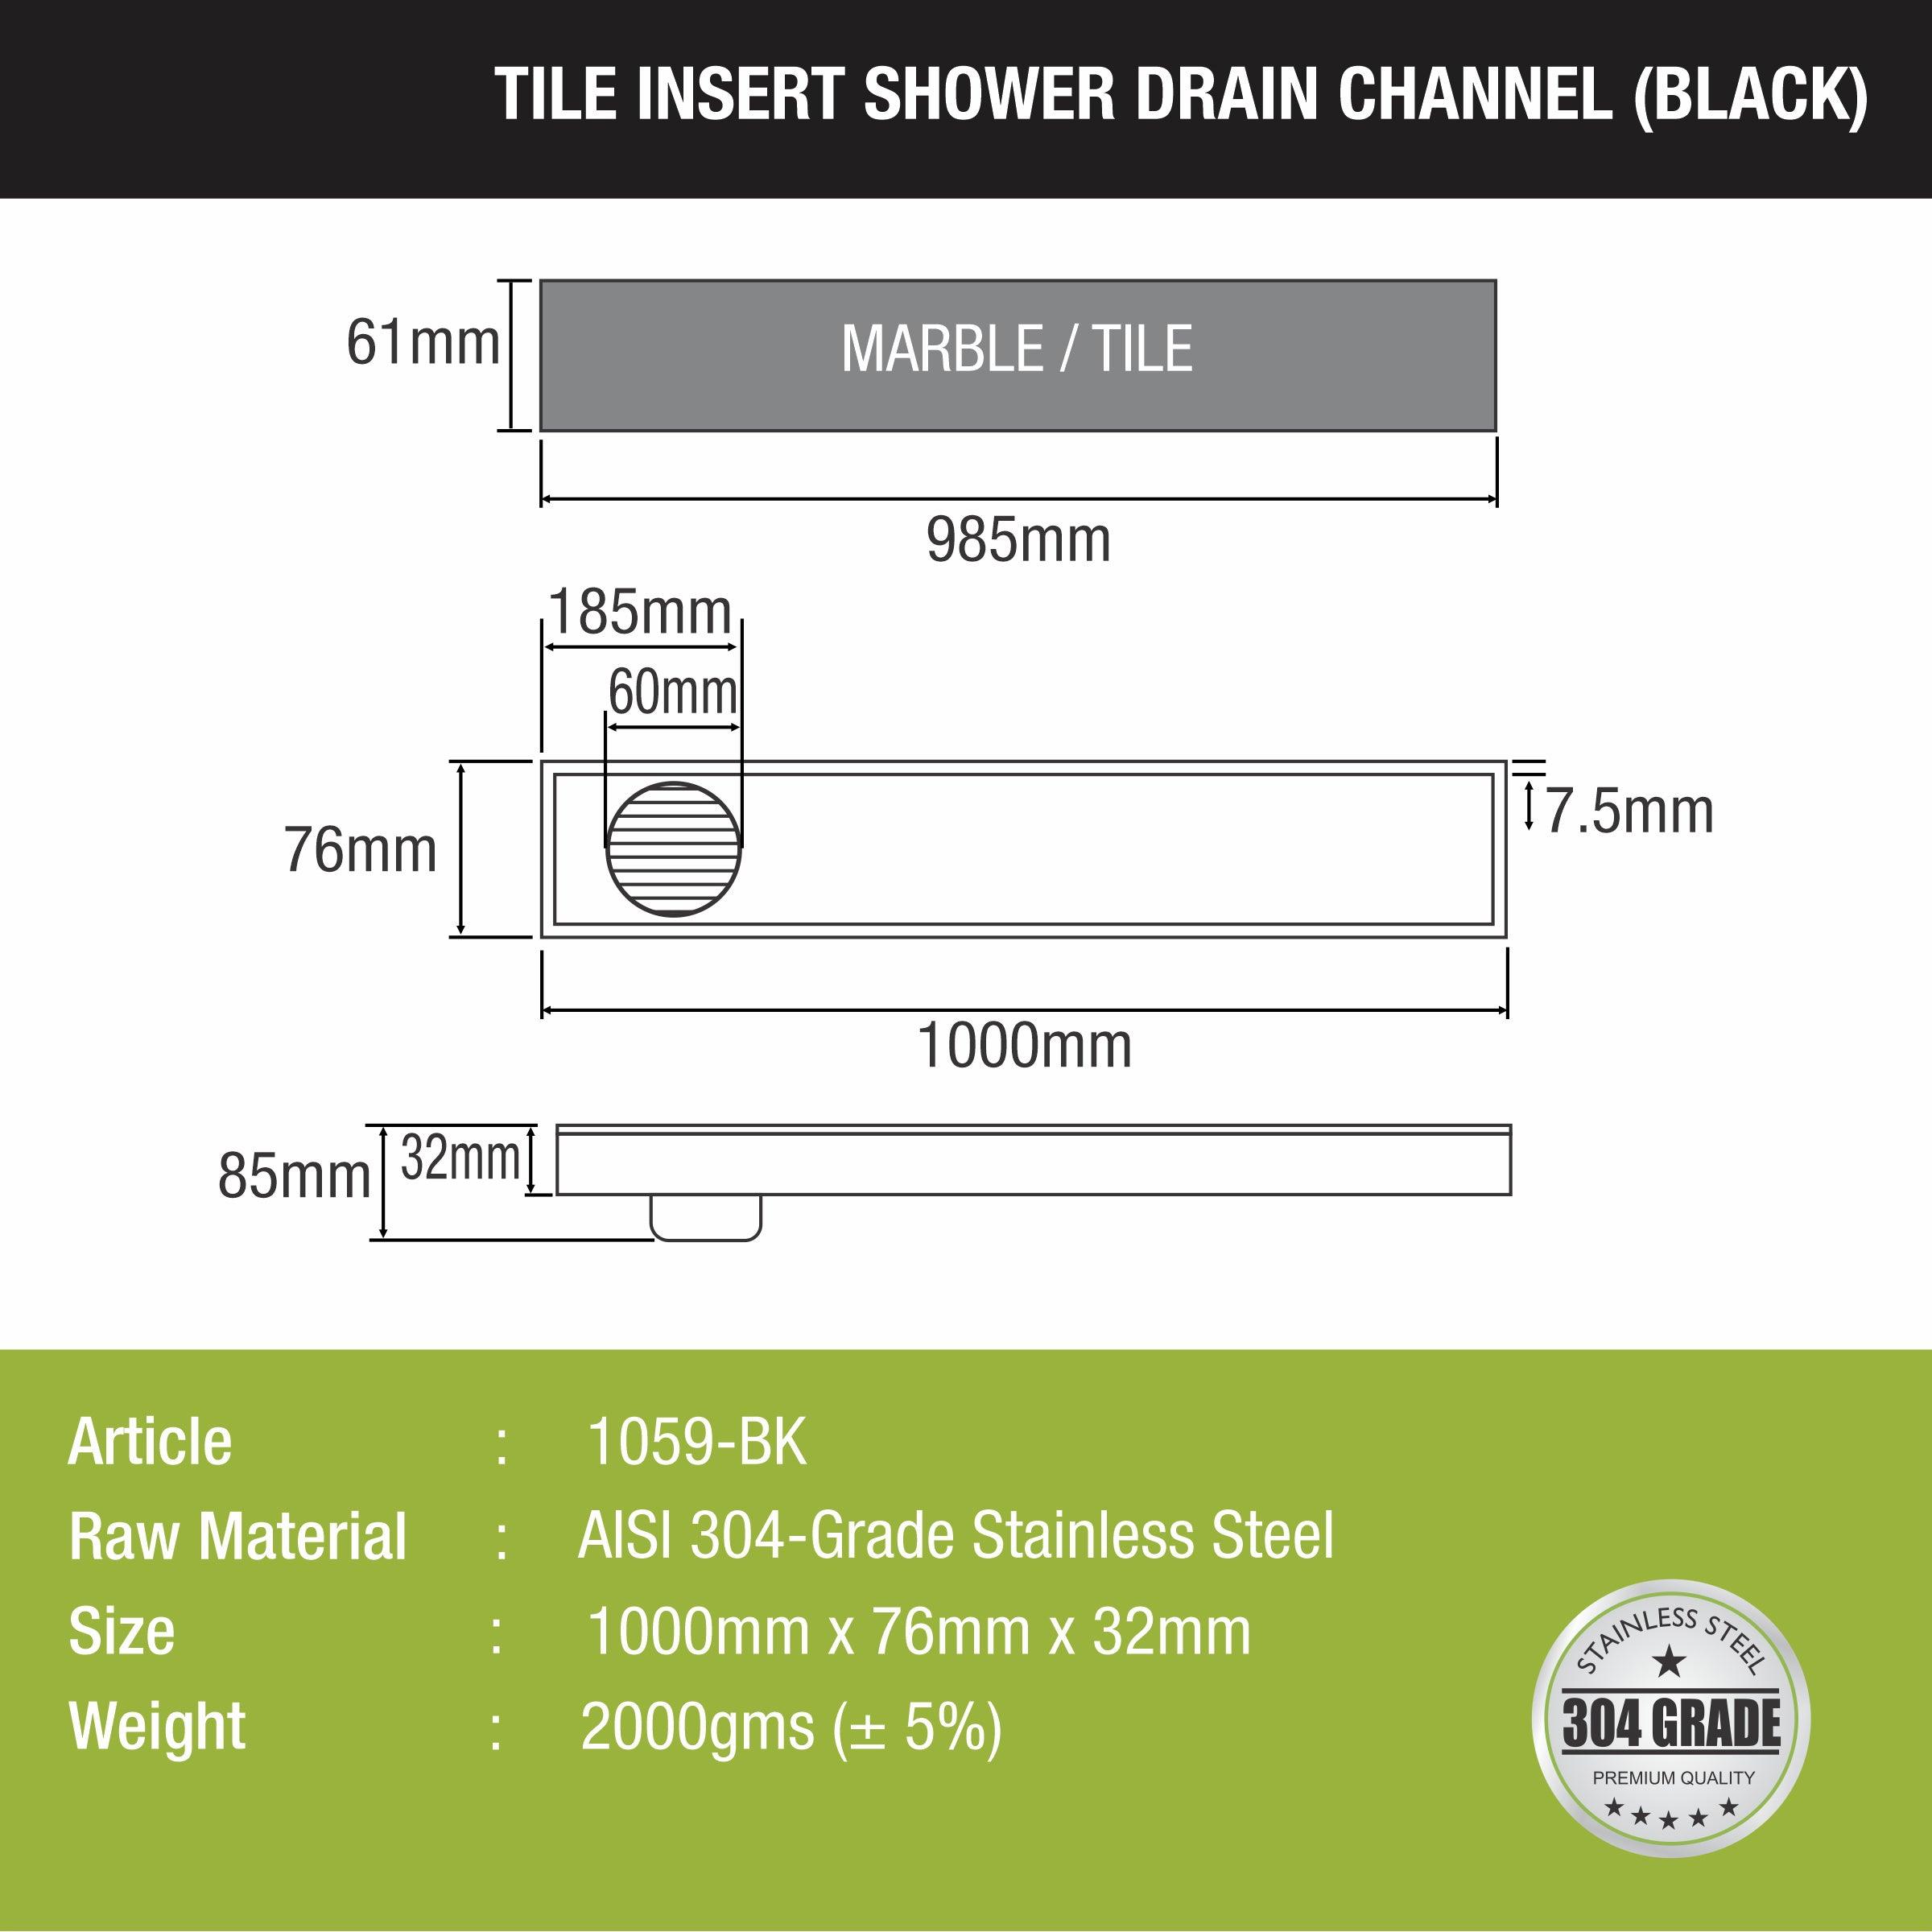 Tile Insert Shower Drain Channel - Black (40 x 3 Inches) size and measurement